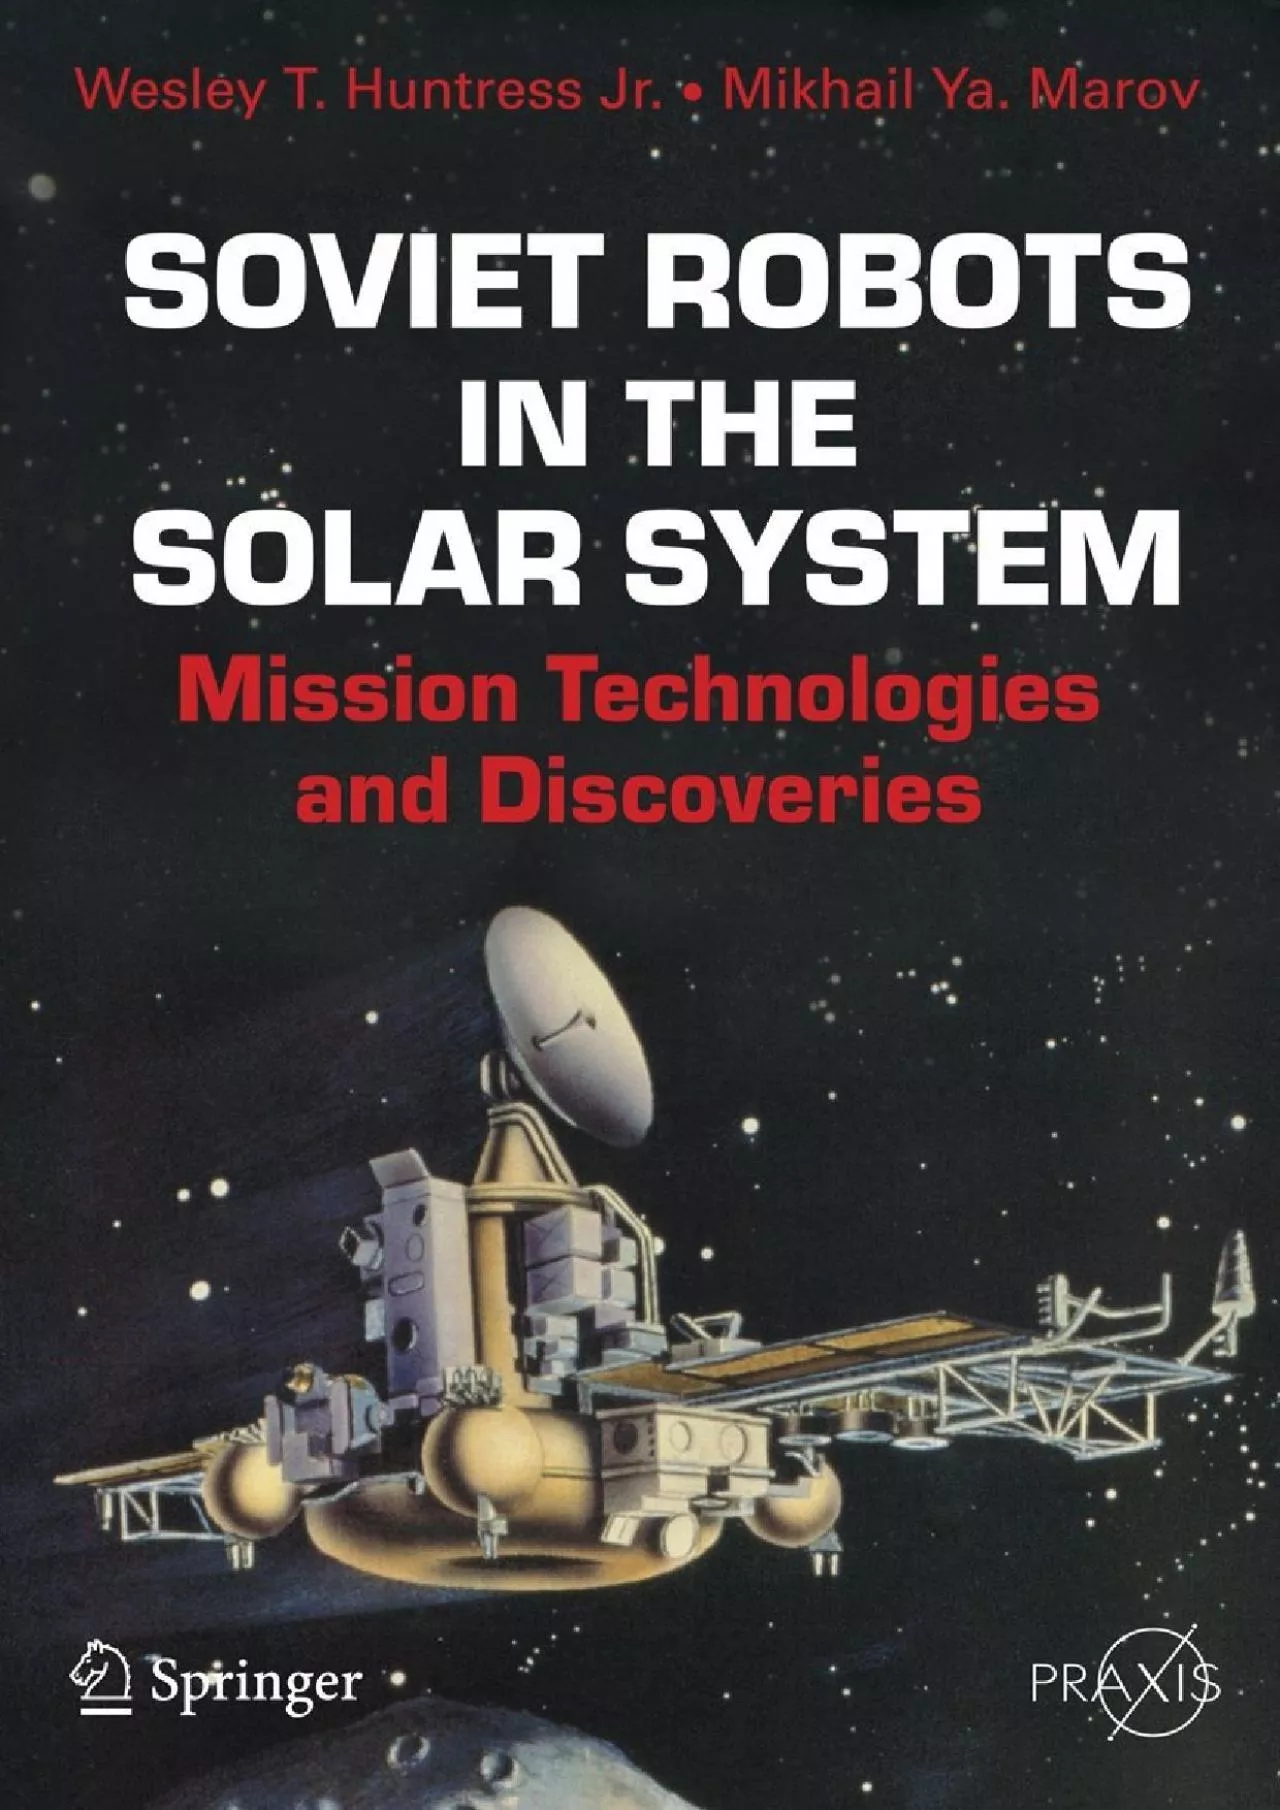 [EBOOK]-Soviet Robots in the Solar System: Mission Technologies and Discoveries (Springer